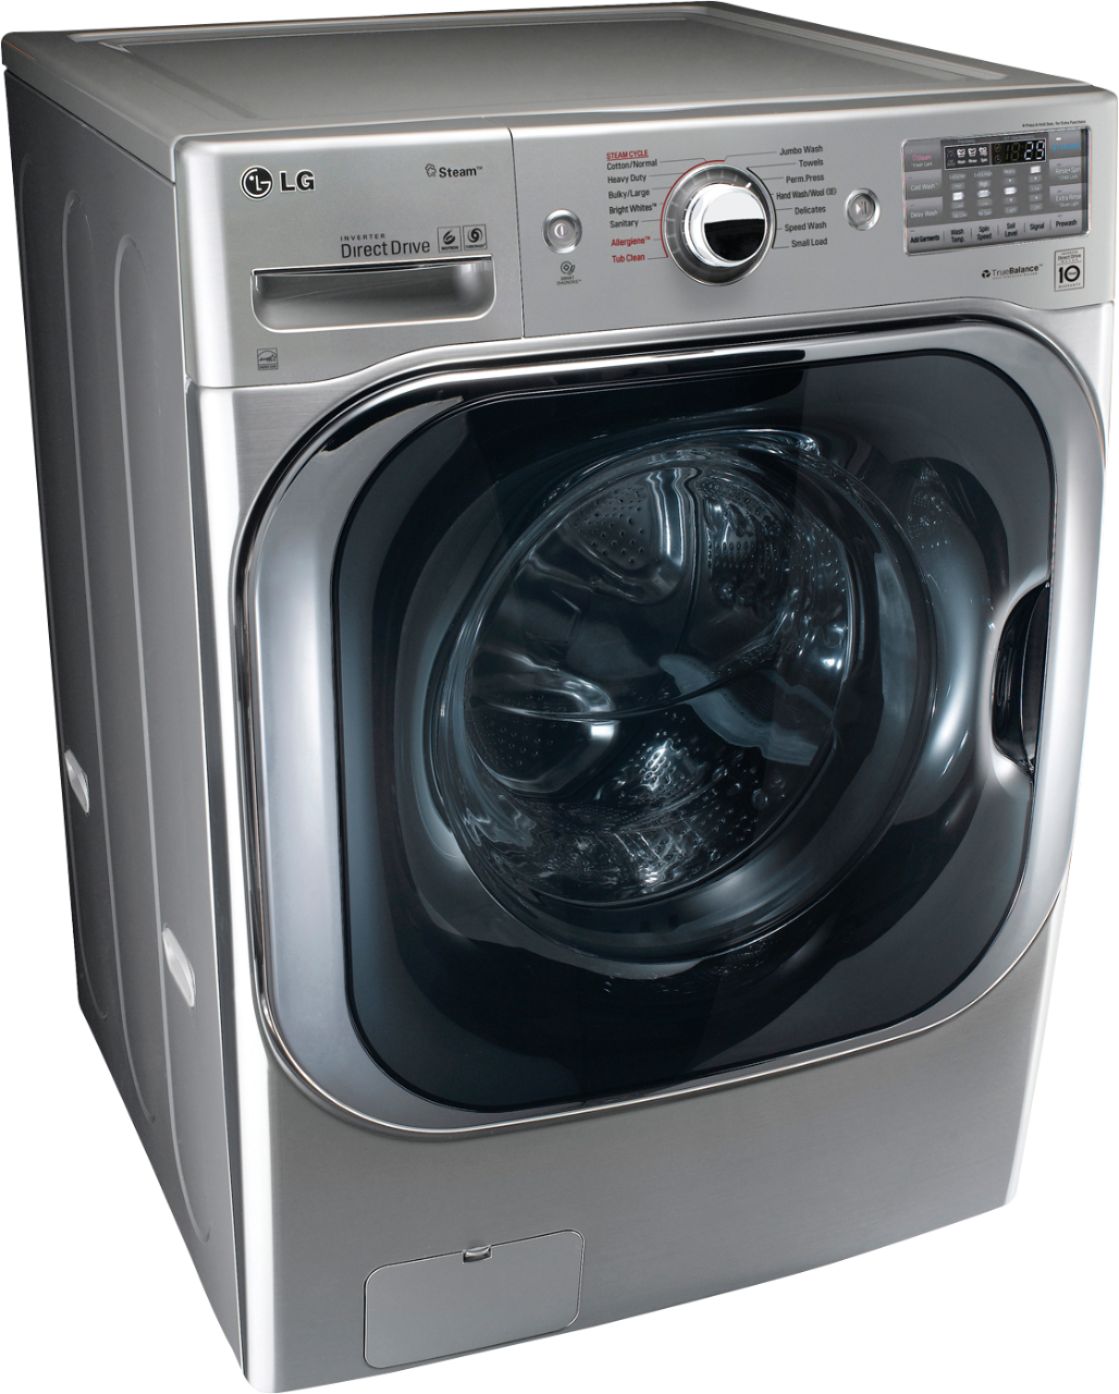 Angle View: LG - 5.2 Cu. Ft. High Efficiency Front-Load Washer with Steam and TurboWash Technology - Graphite steel